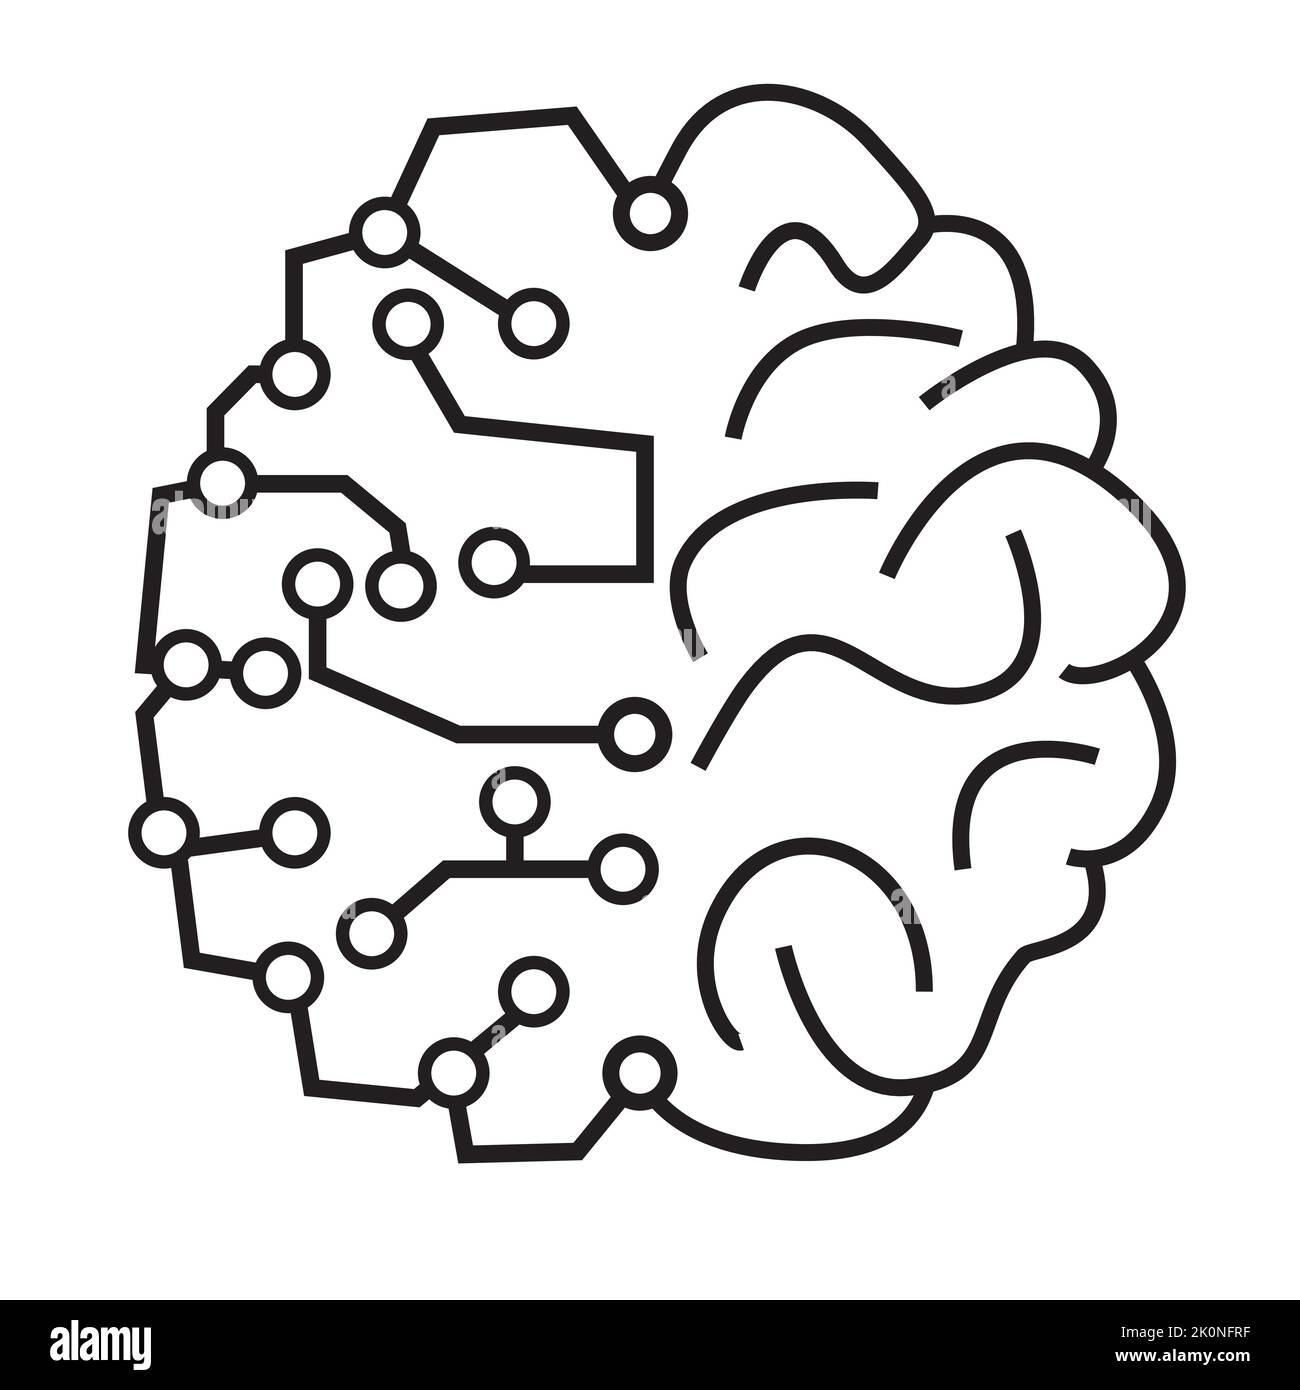 Half organic human brain enhanced with artificial intelligence. Simple line icon drawing for transhuman and AI technology concept design Stock Vector